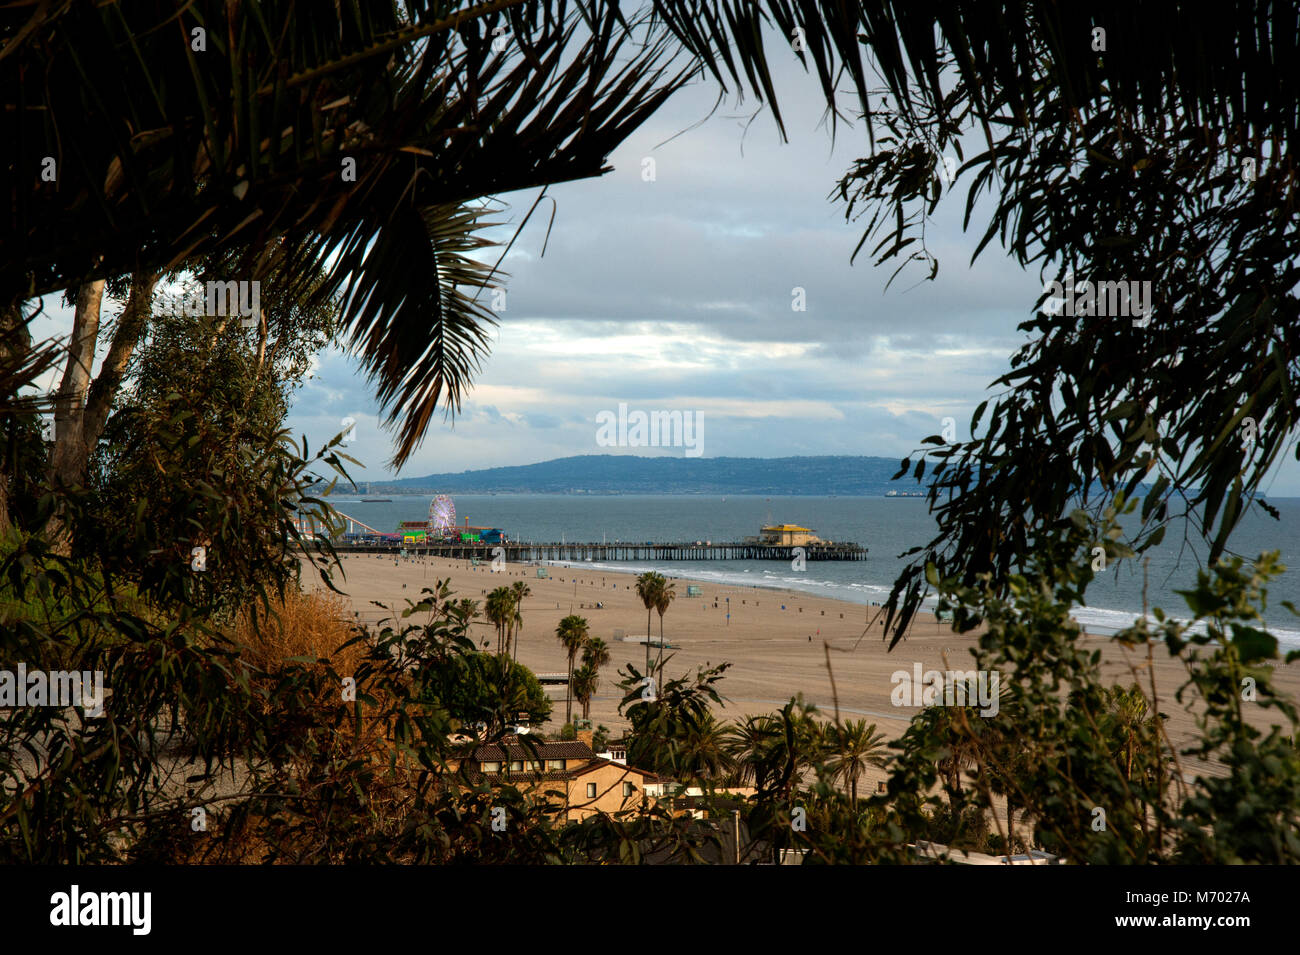 A scenic view of the Santa Monica Pier from Palisades Park on the cliffs overlooking the Pacific Ocean at Los Angeles, CA Stock Photo